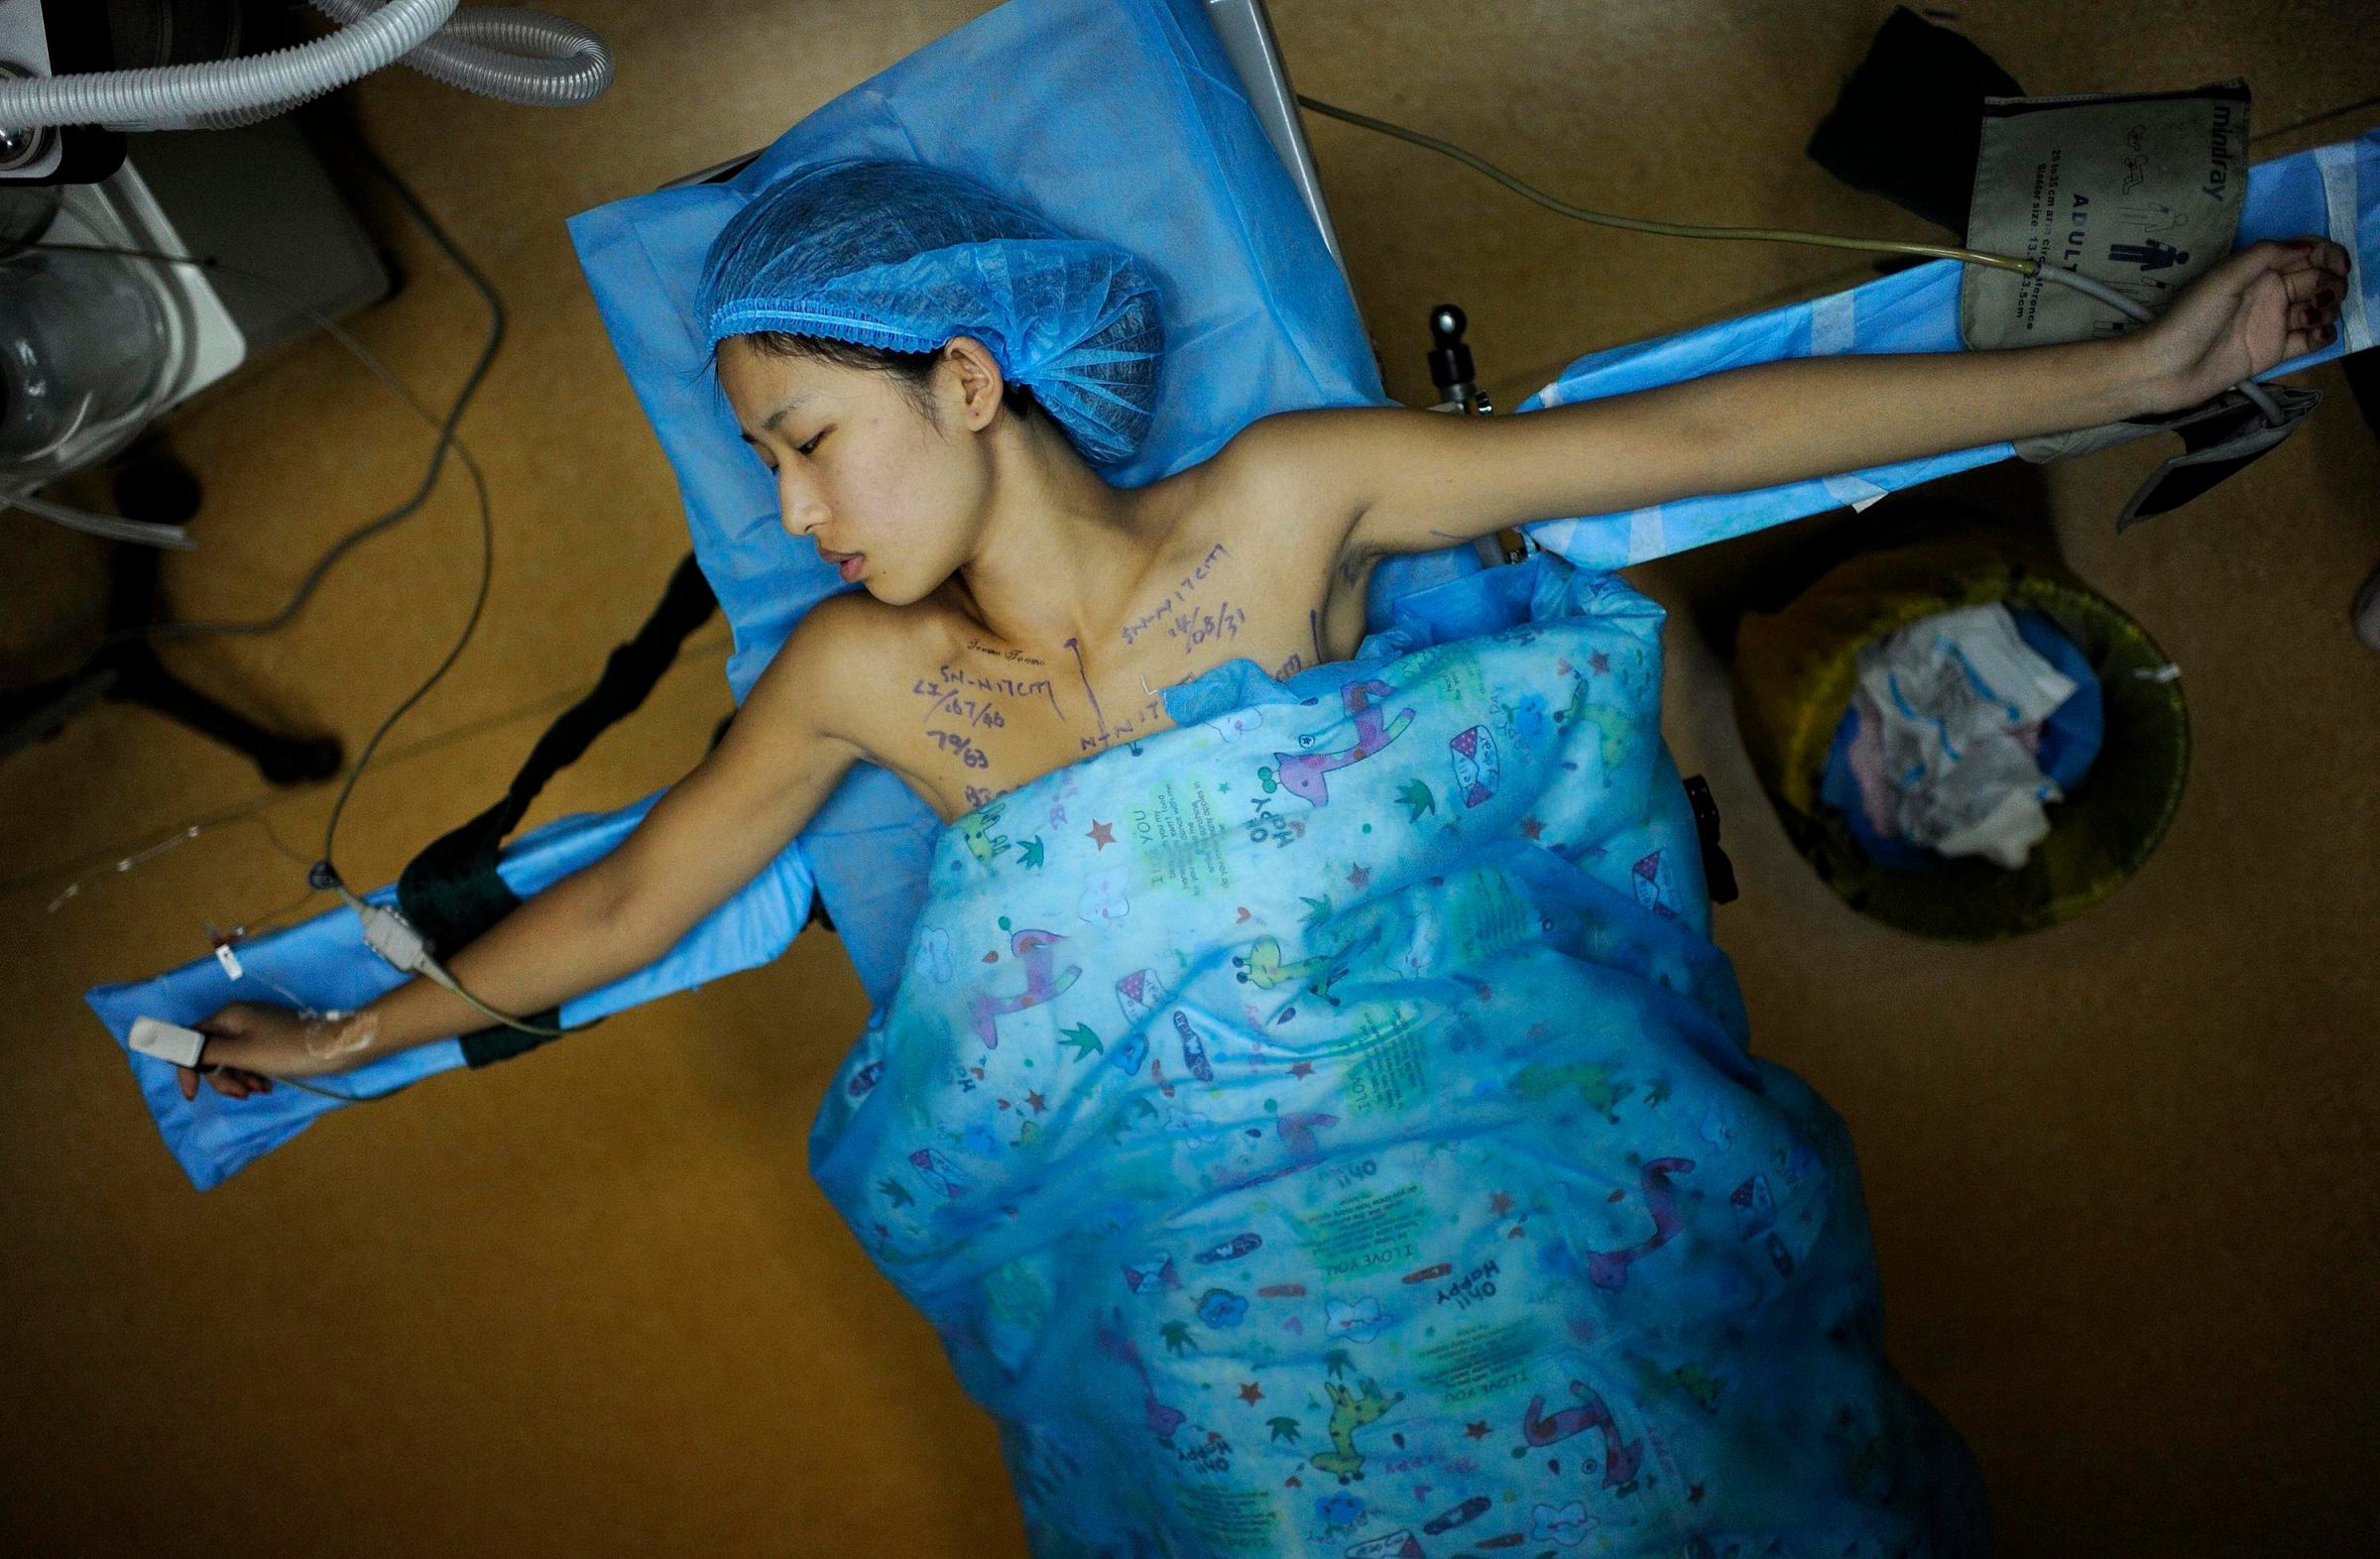 Feifei, 21, undergoes a breast implant surgery at a hospital in Hefei, Anhui province, China on September 1, 2014. Feifei, a third-year university student and a part-time model, received a free breast implant surgery in return for advertising for the hospital. Around 10 days after the operation, she won a prize at a local beauty contest.